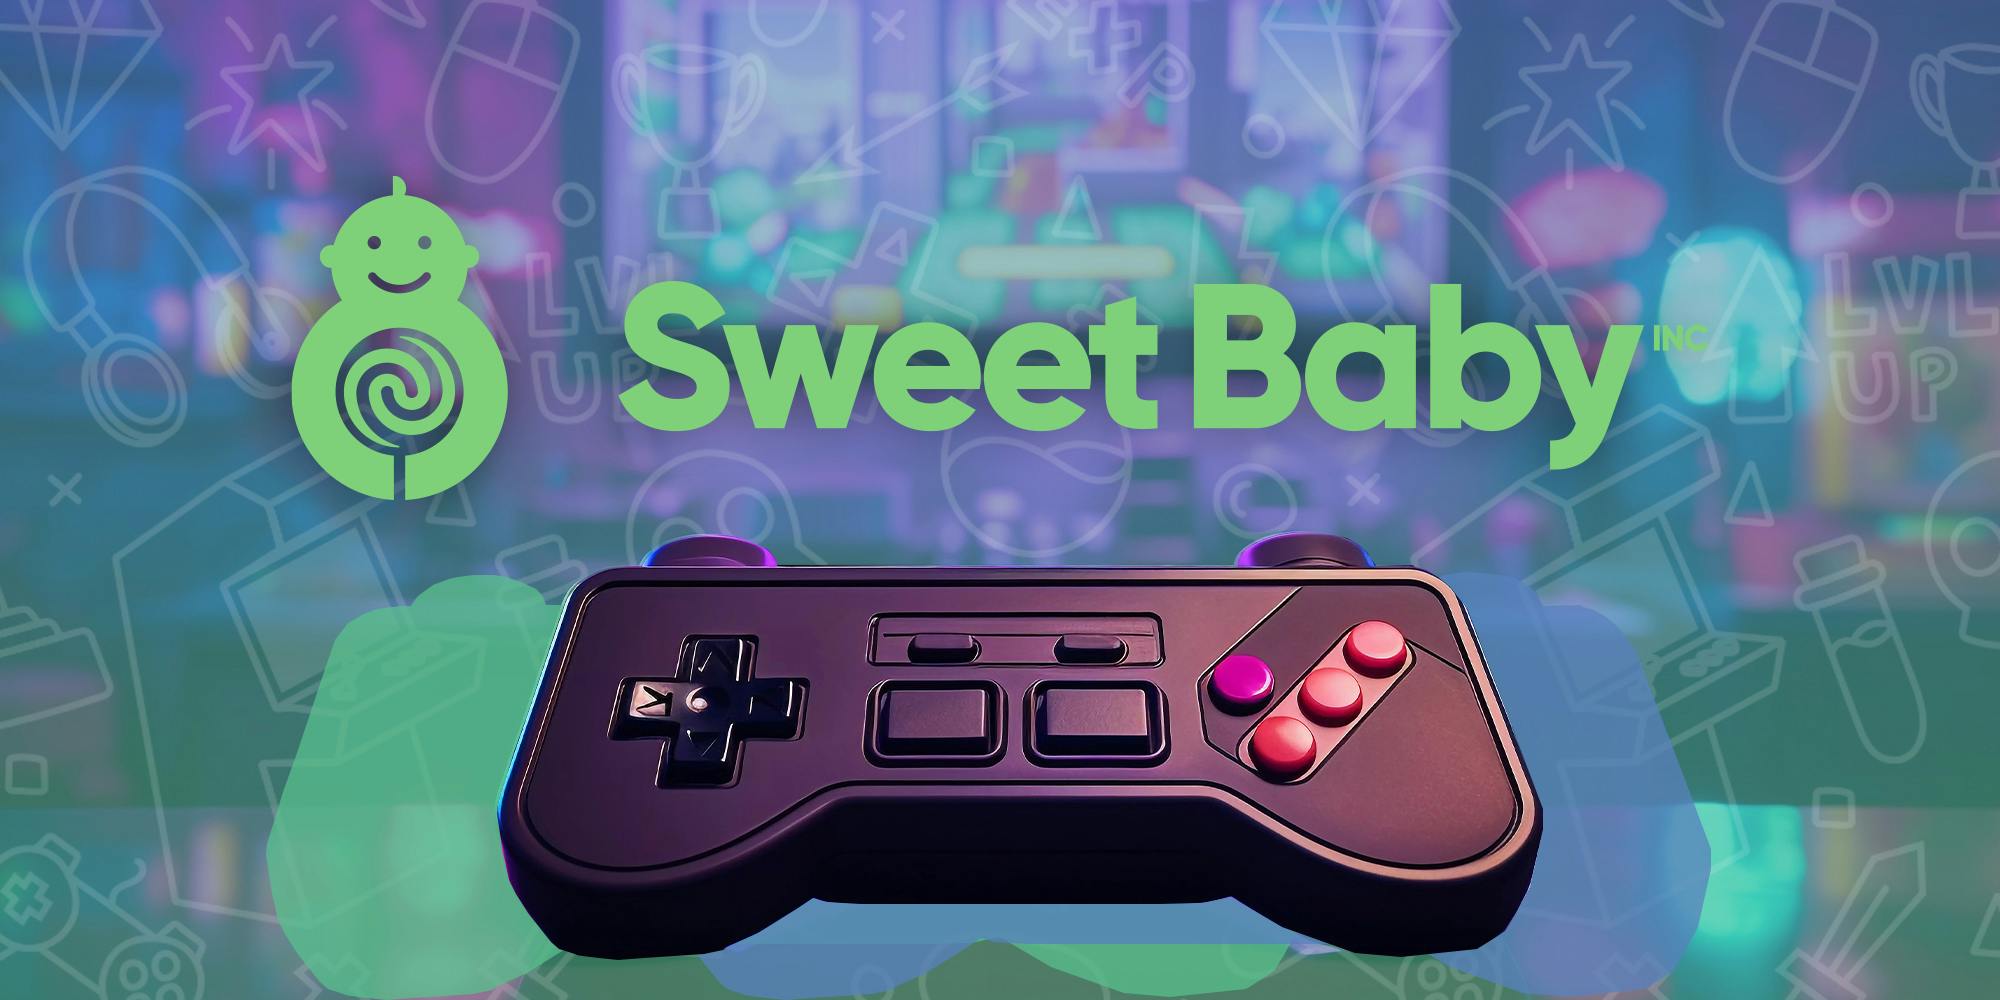 How to Build a GamerGate: How Sweet Baby Inc. Became Edgelord Enemy #1